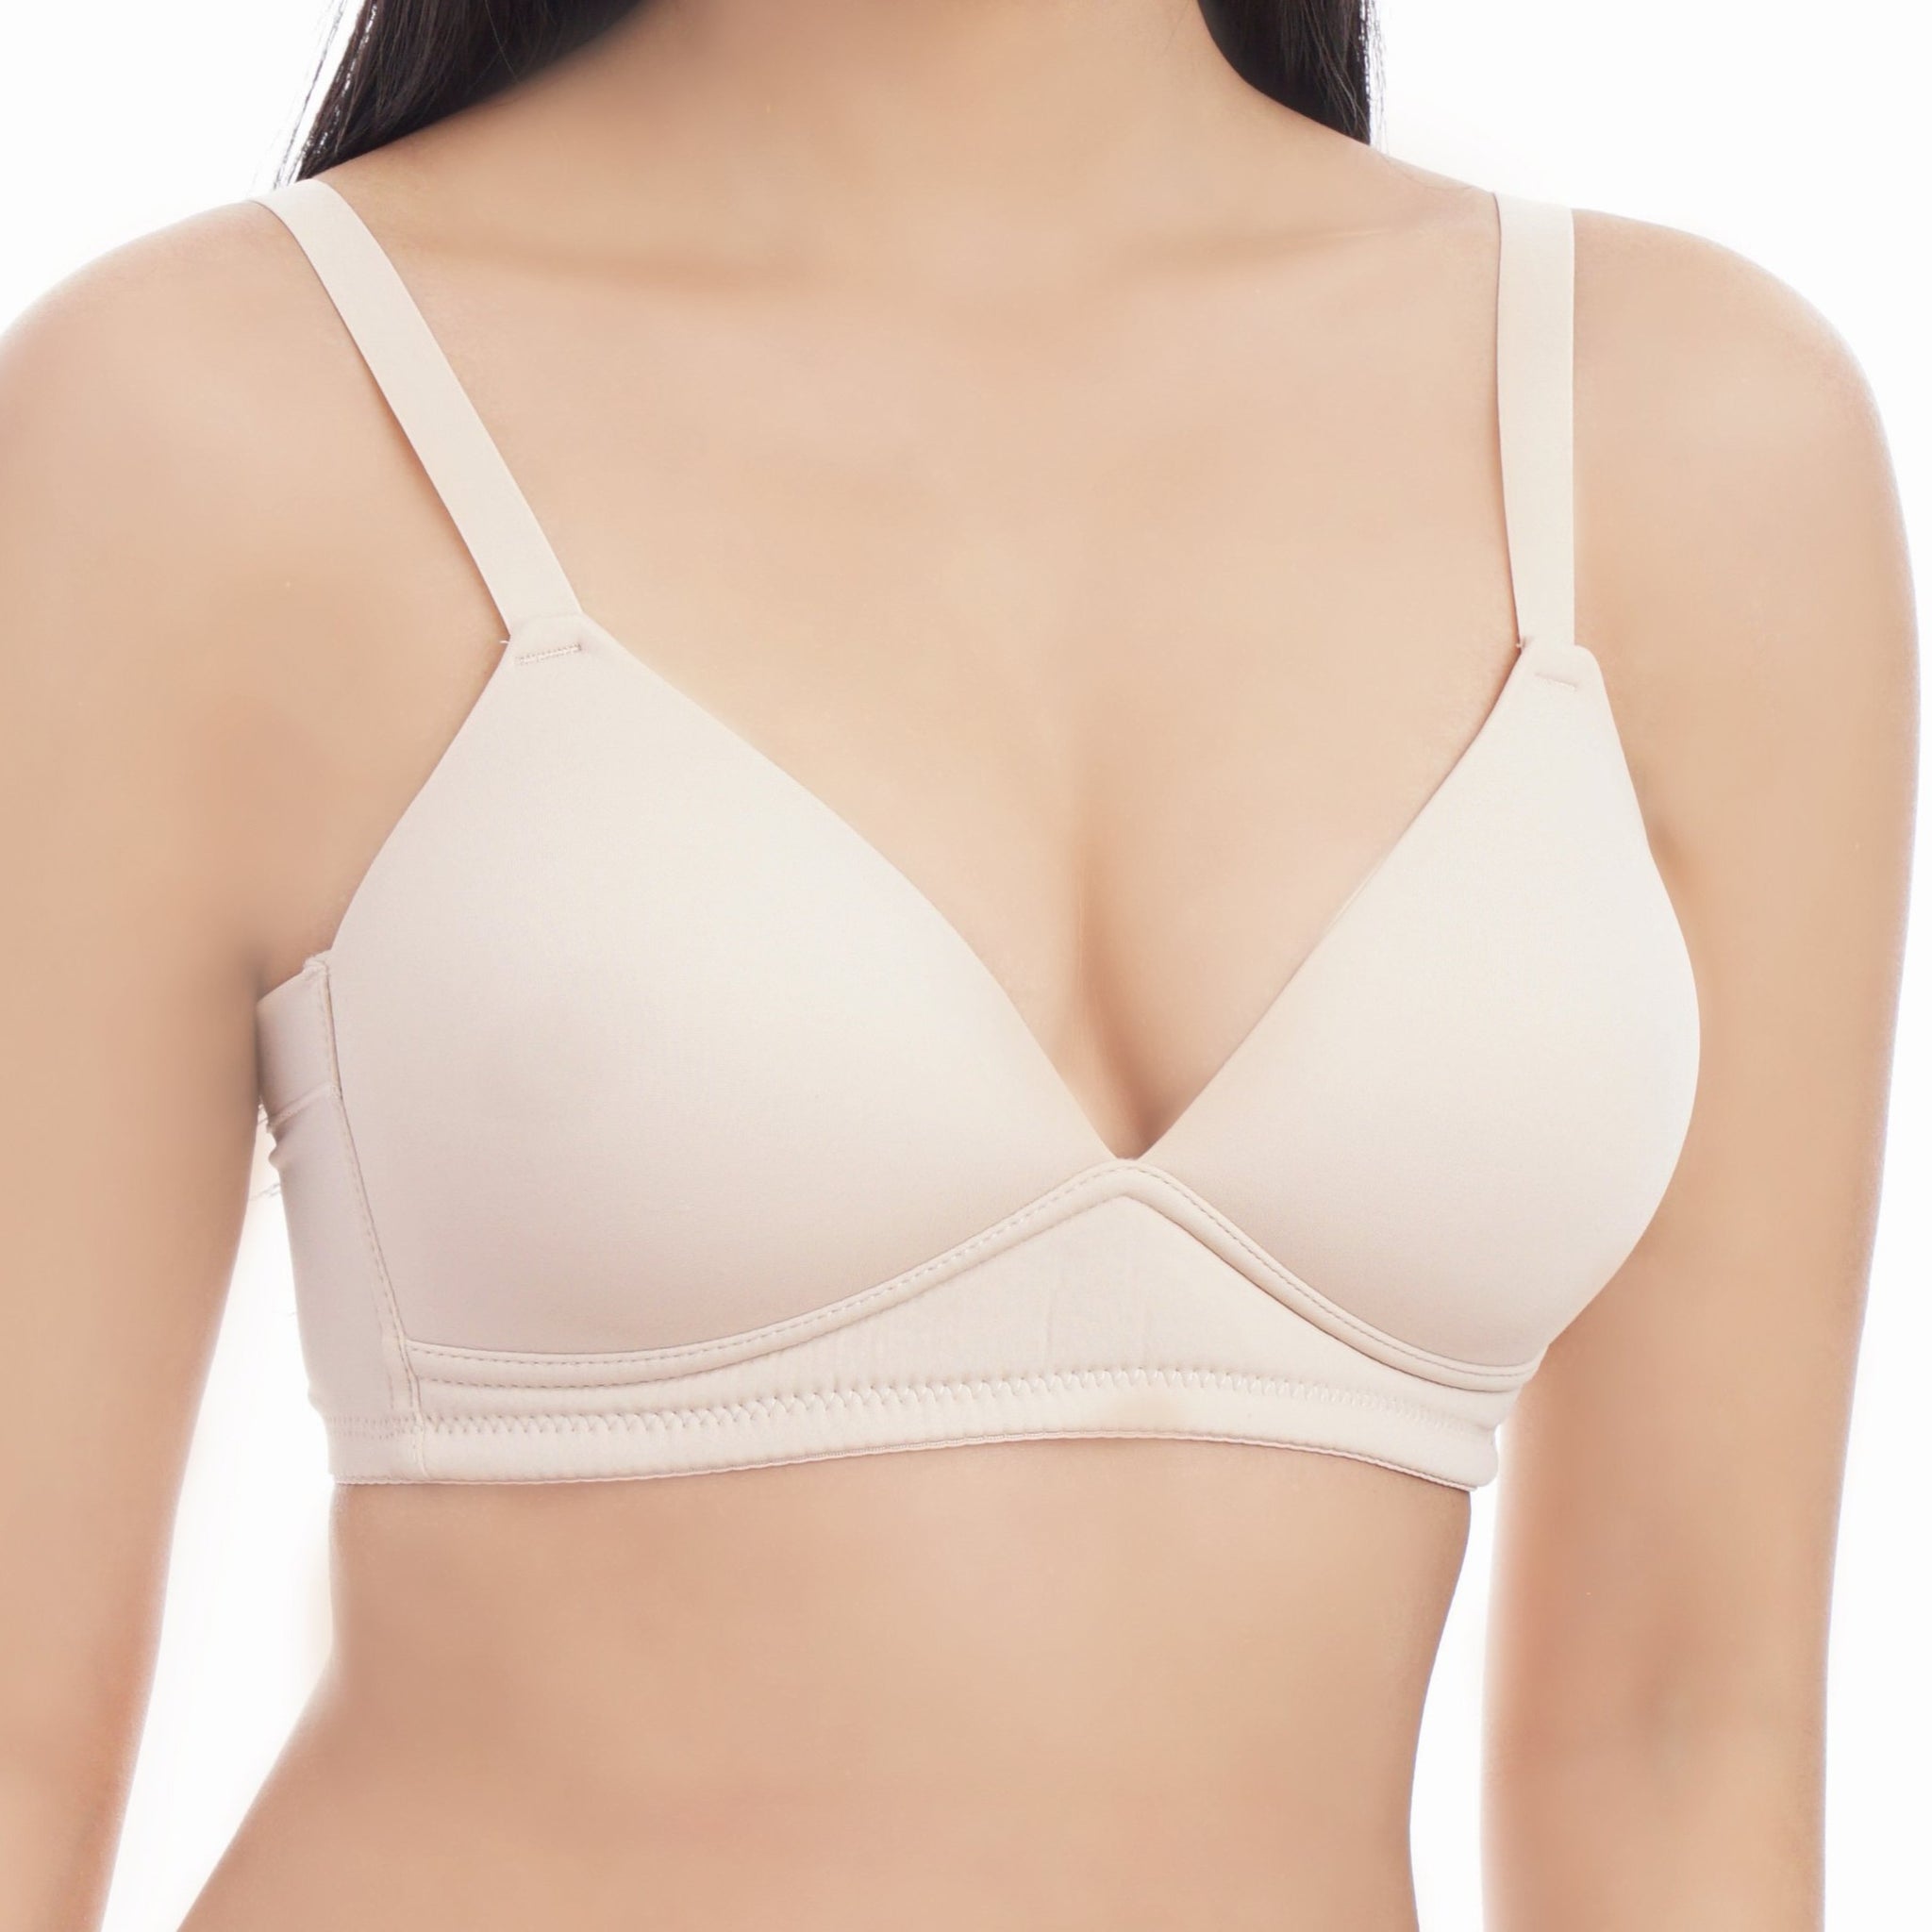 Lady Grace Intimates Non-Wired Molded Bra - 5248-1